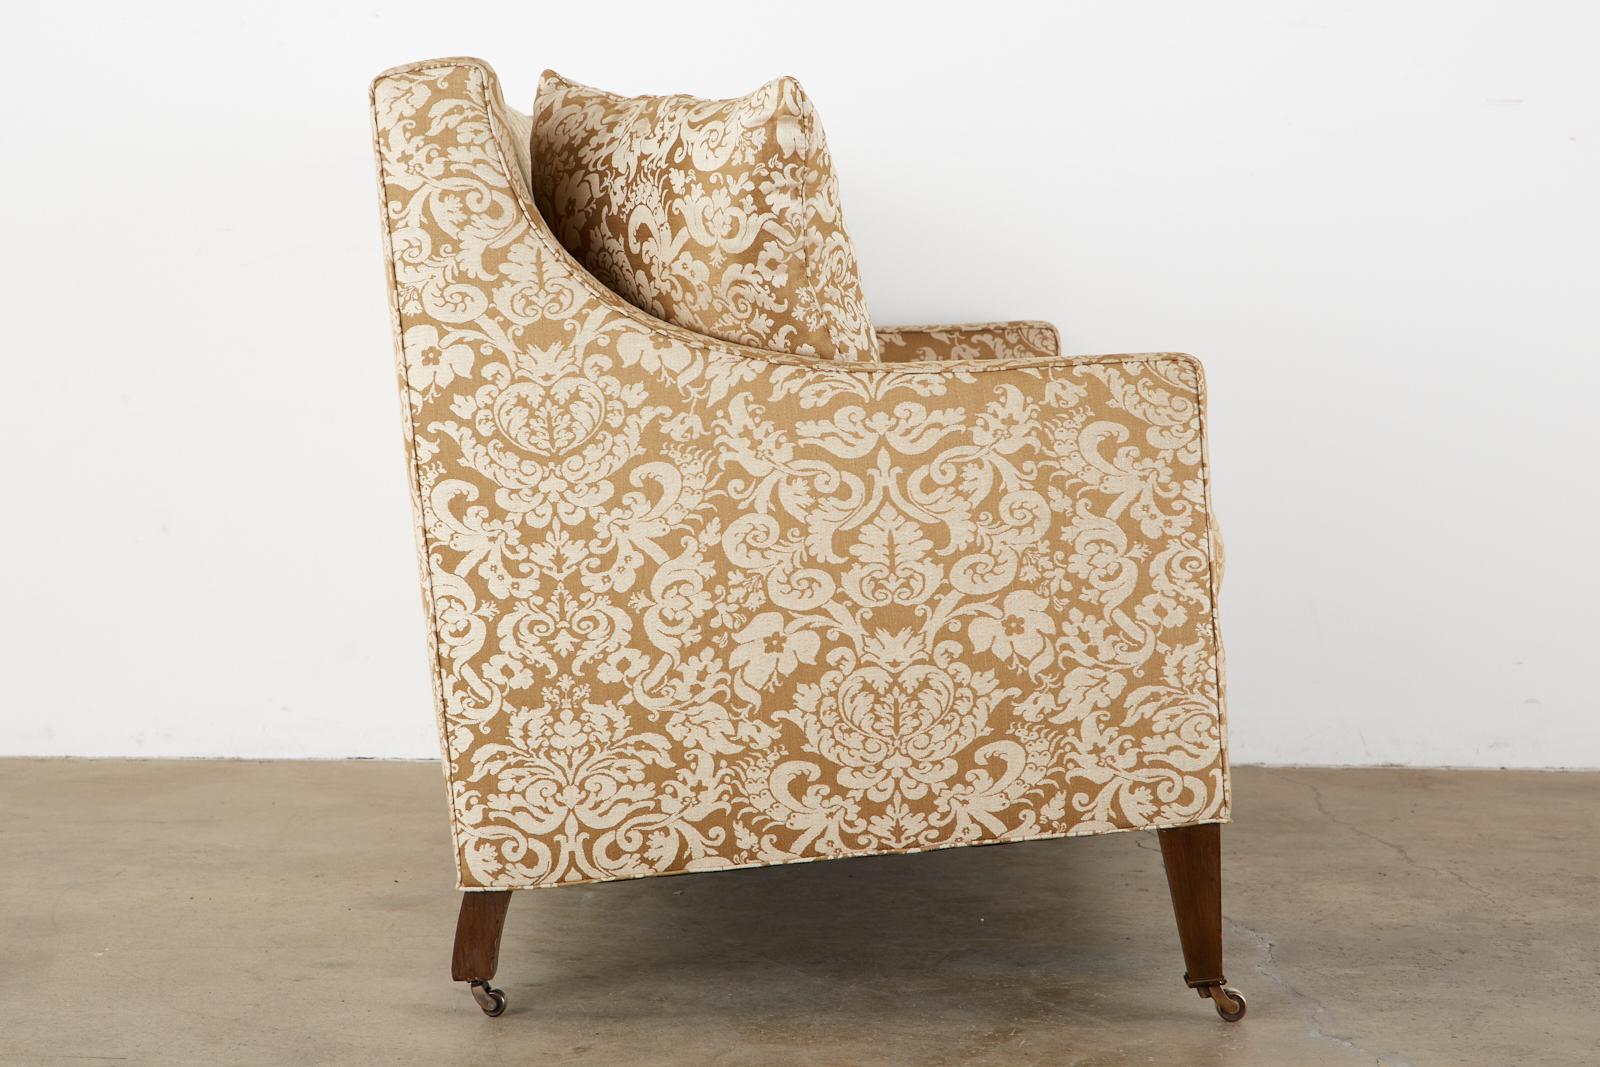 Hand-Crafted Michael Taylor Settee with Fortuny Glicine Style Upholstery